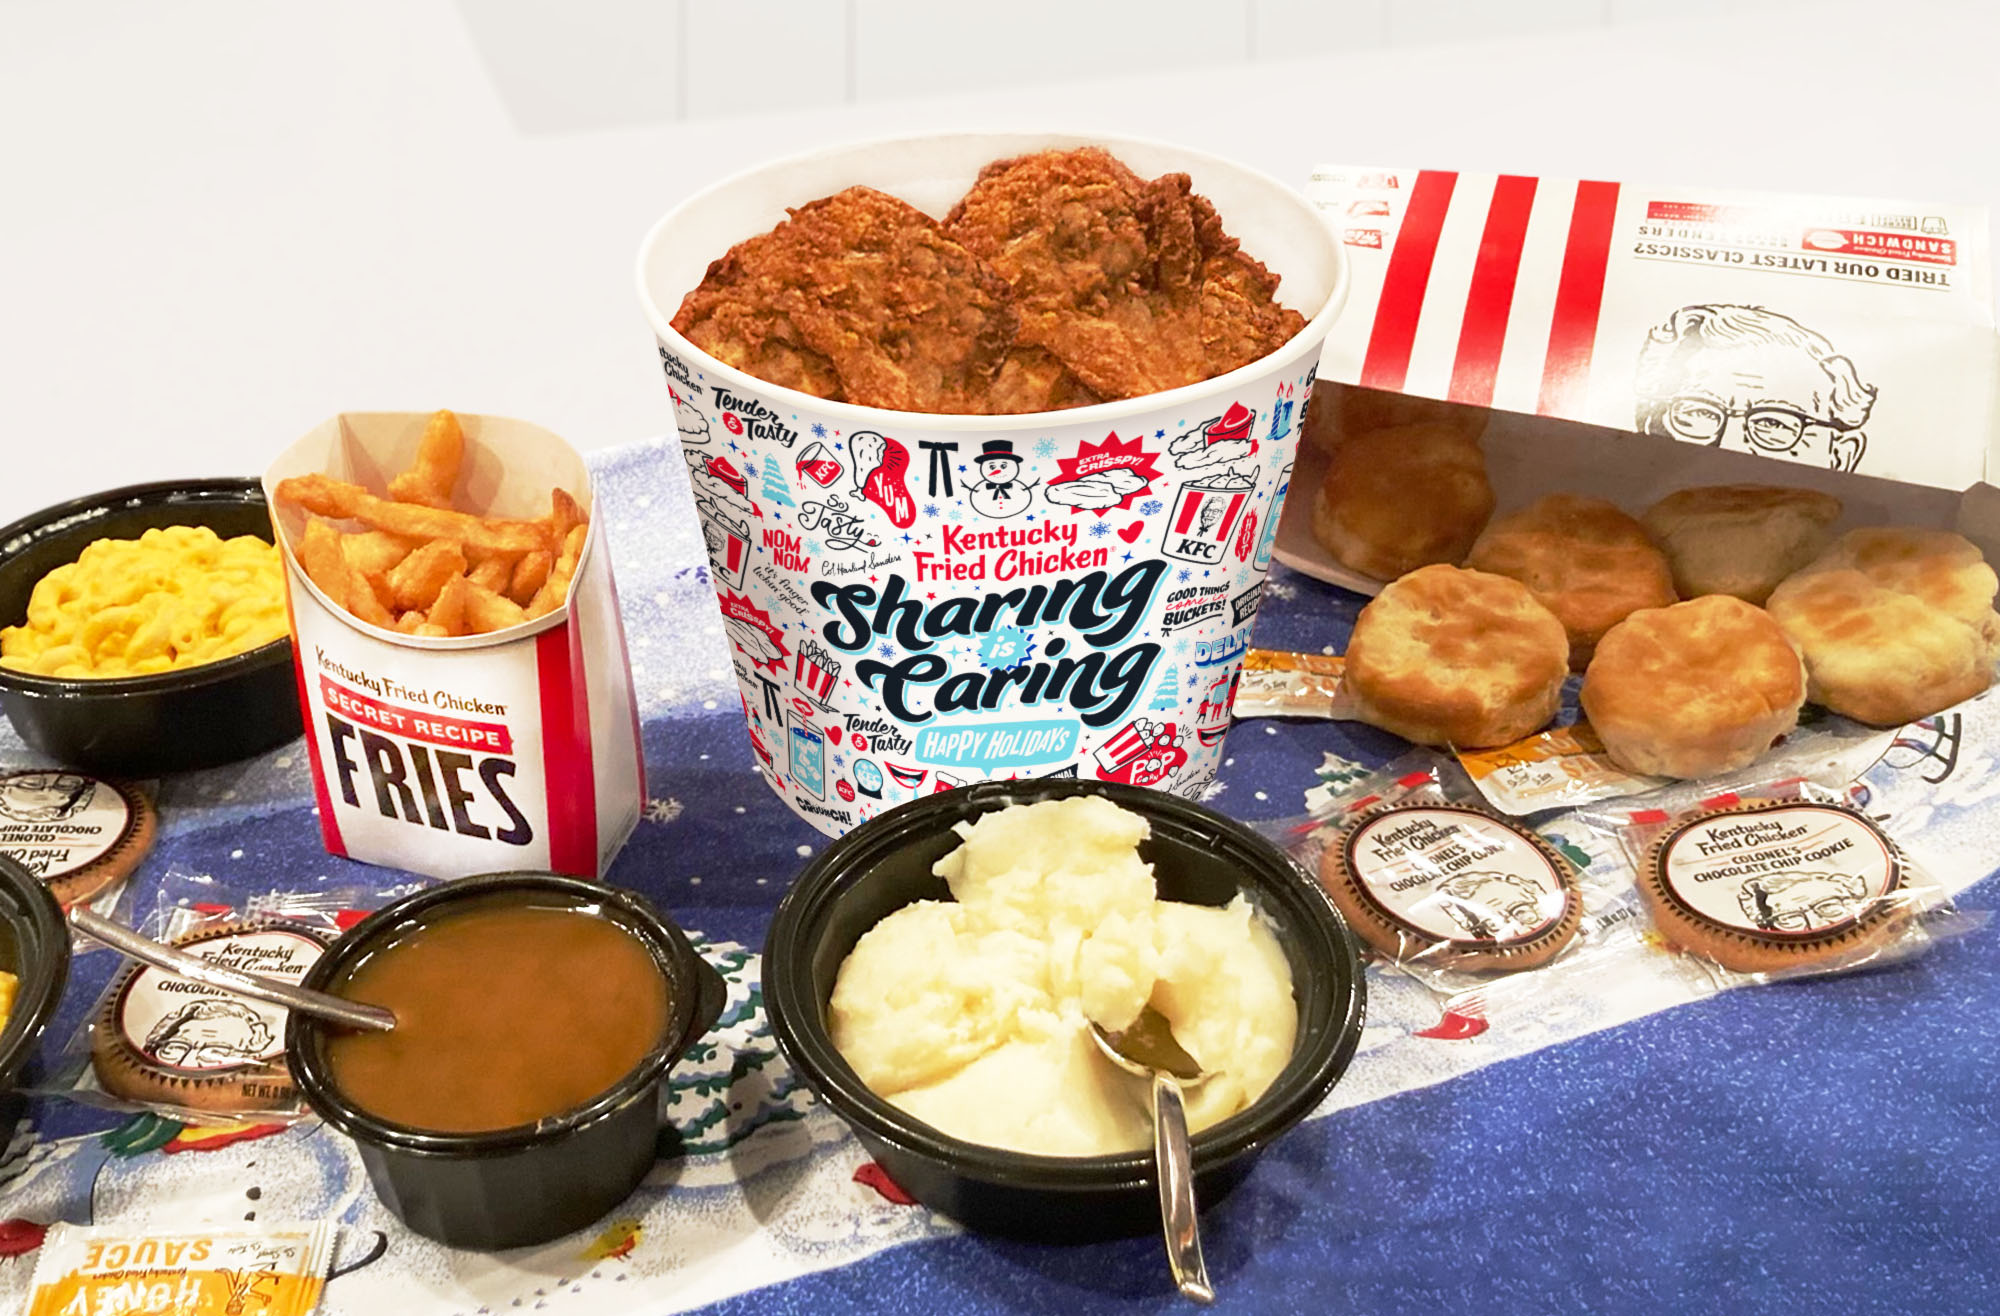 KFC Sharing is Caring Holiday Bucket. KFC meal shared with the family during the holidays. Packaging design by Allan Chan.